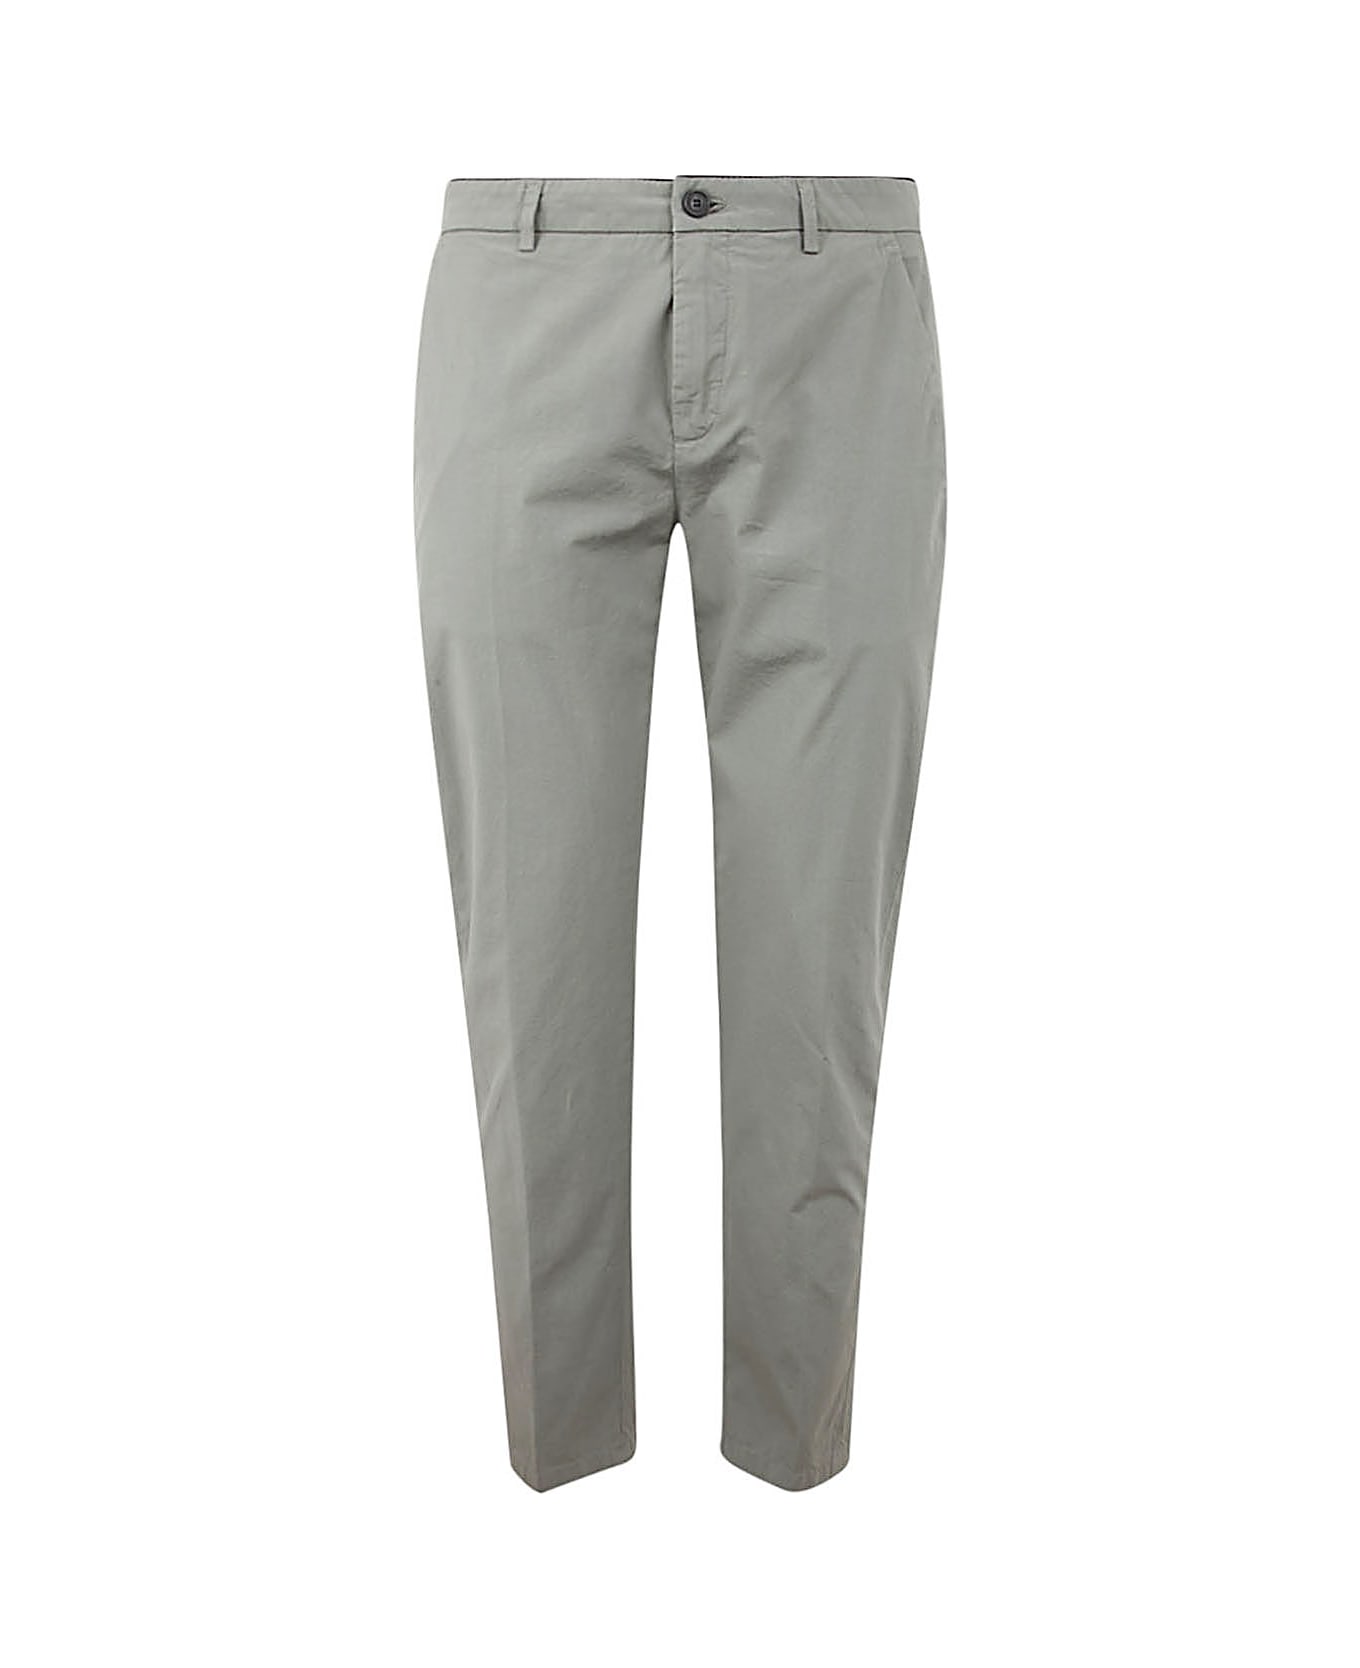 Department Five Prince Crop Chino Trousers - Soft Sage ボトムス